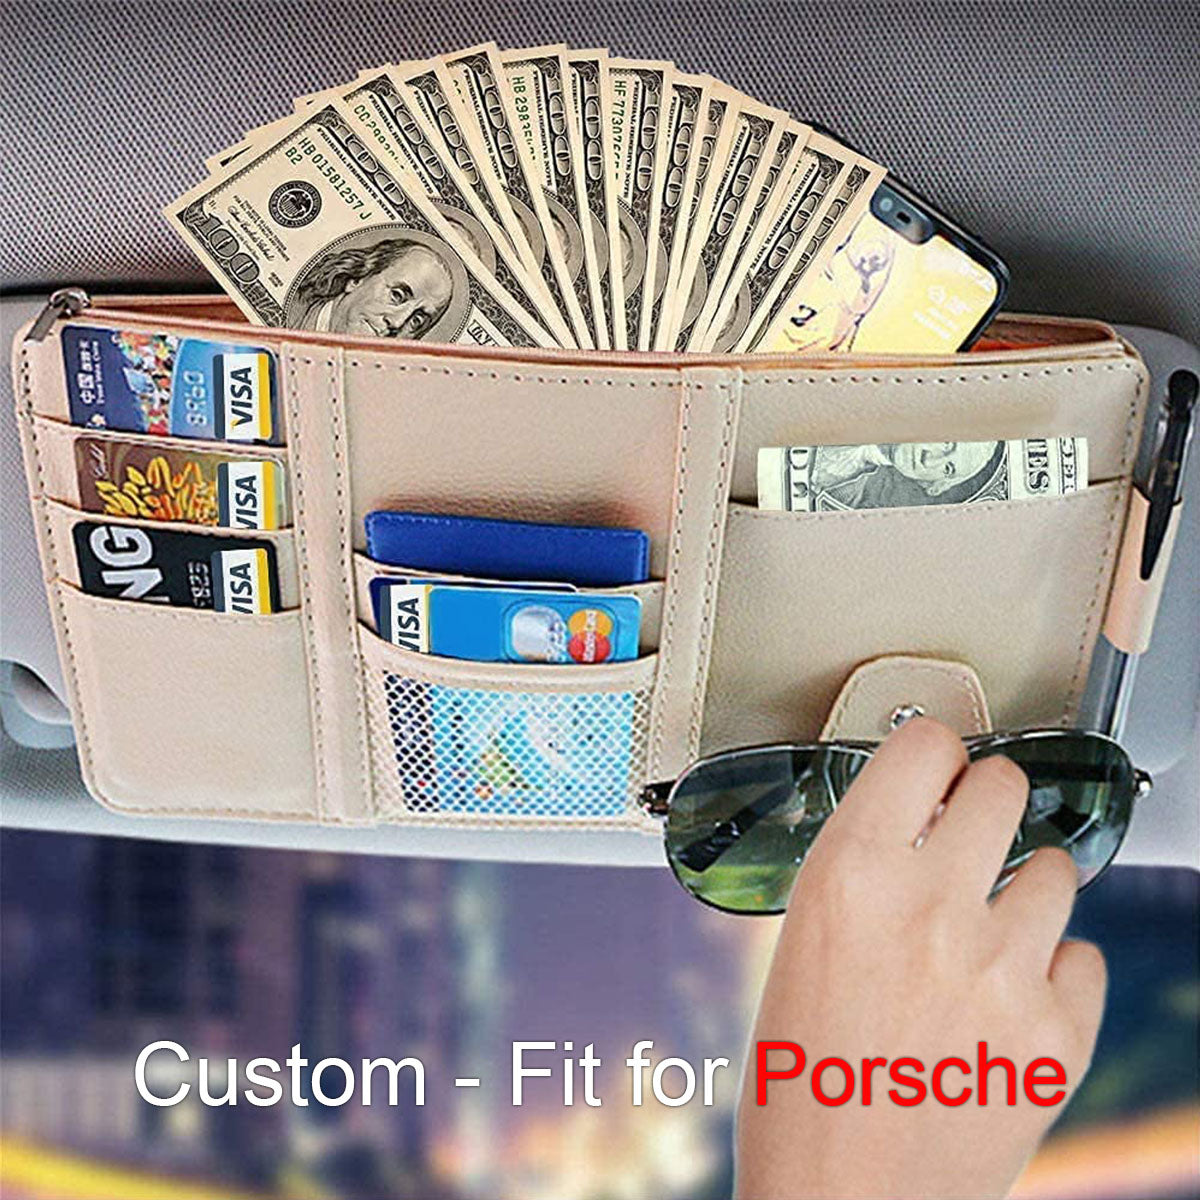 Car Sun Visor Organizer - Auto Interior Accessories Pocket Organizer, Insurance and Registration Wallet Storage Pouch for Cars - Cards, Pens, Sunglasses and Document Holder